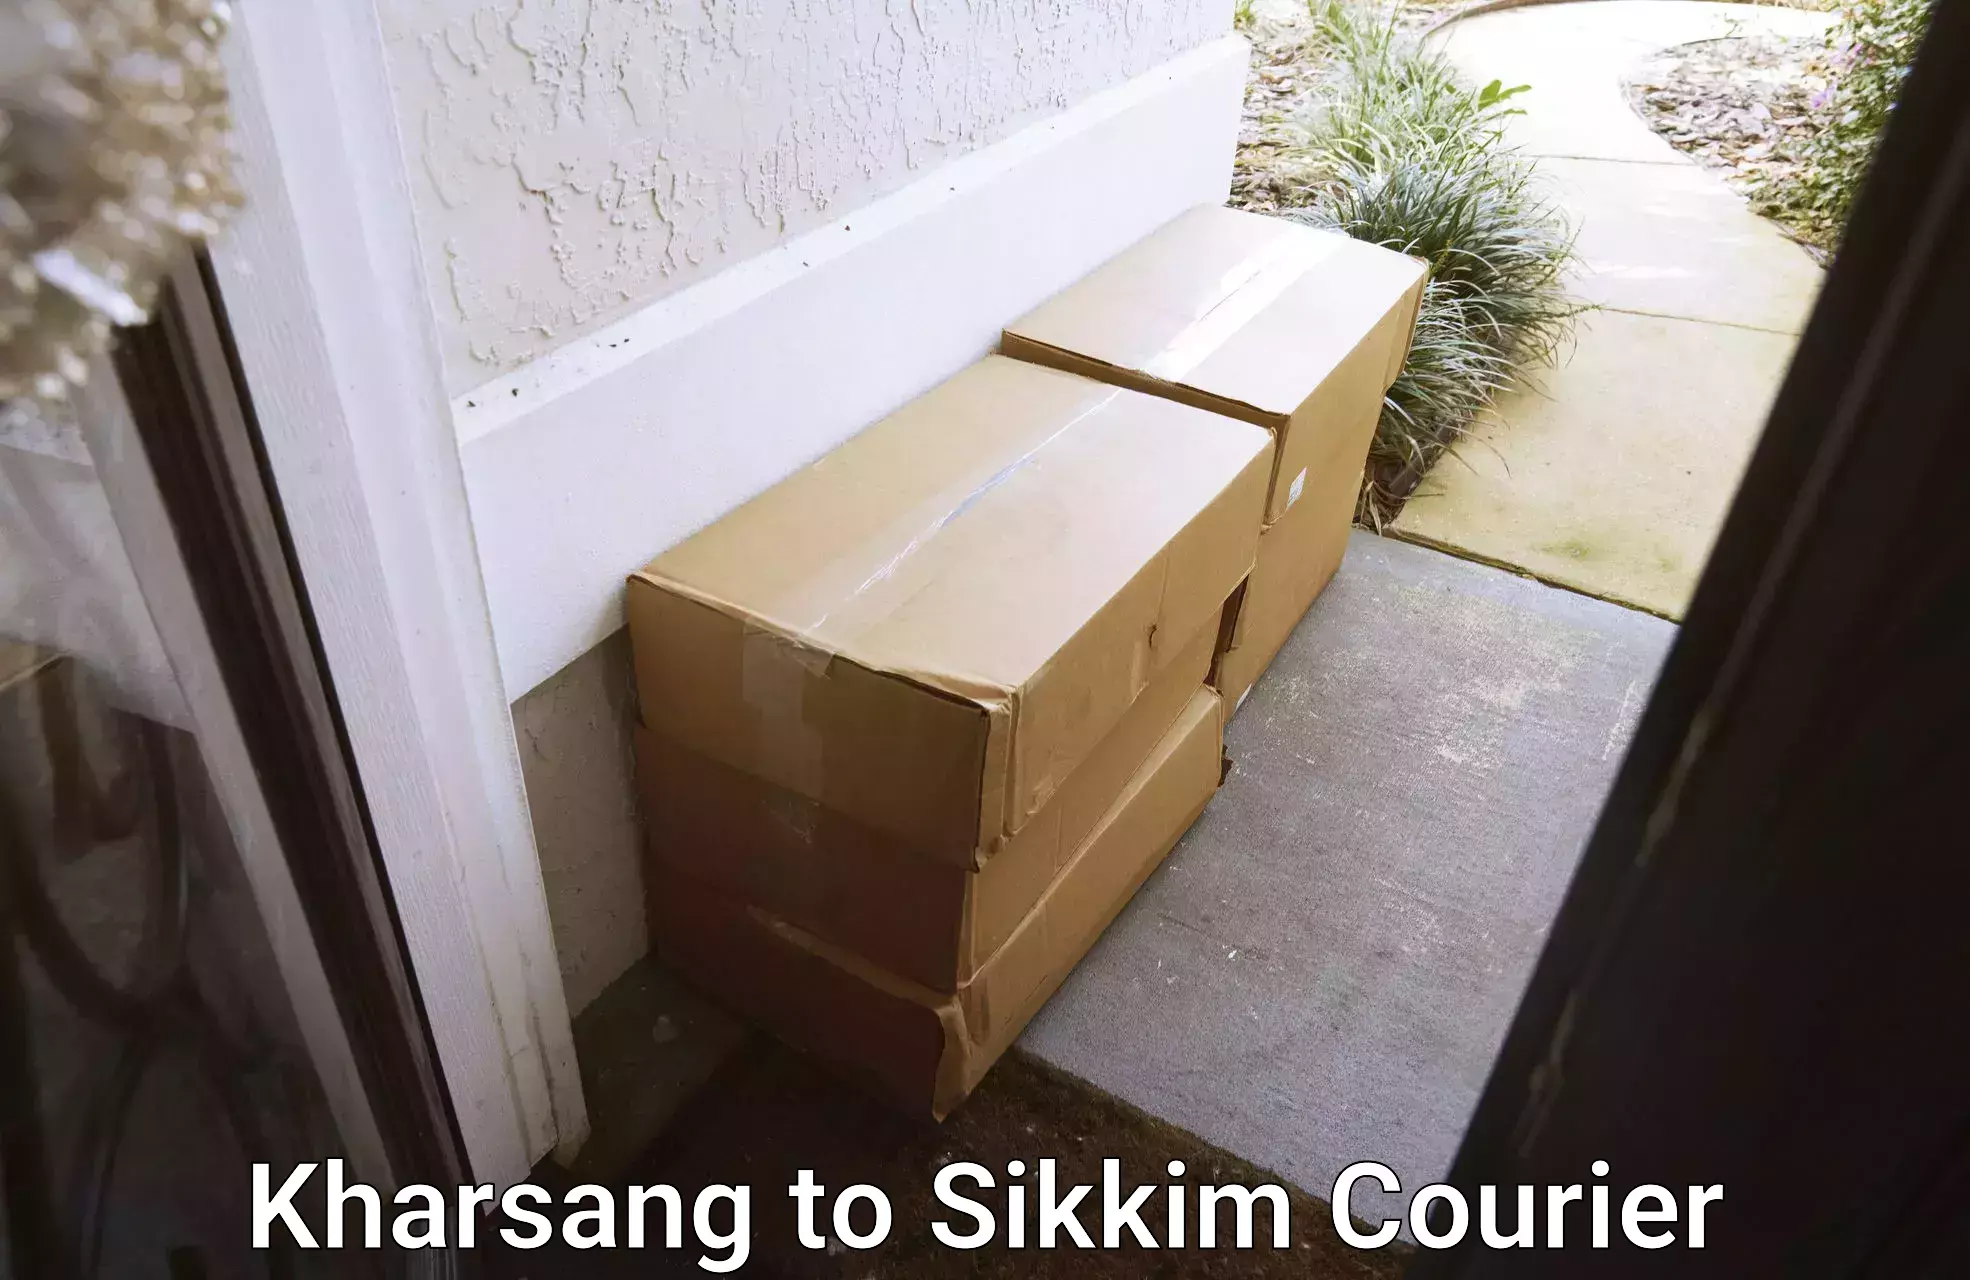 End-to-end delivery Kharsang to Sikkim